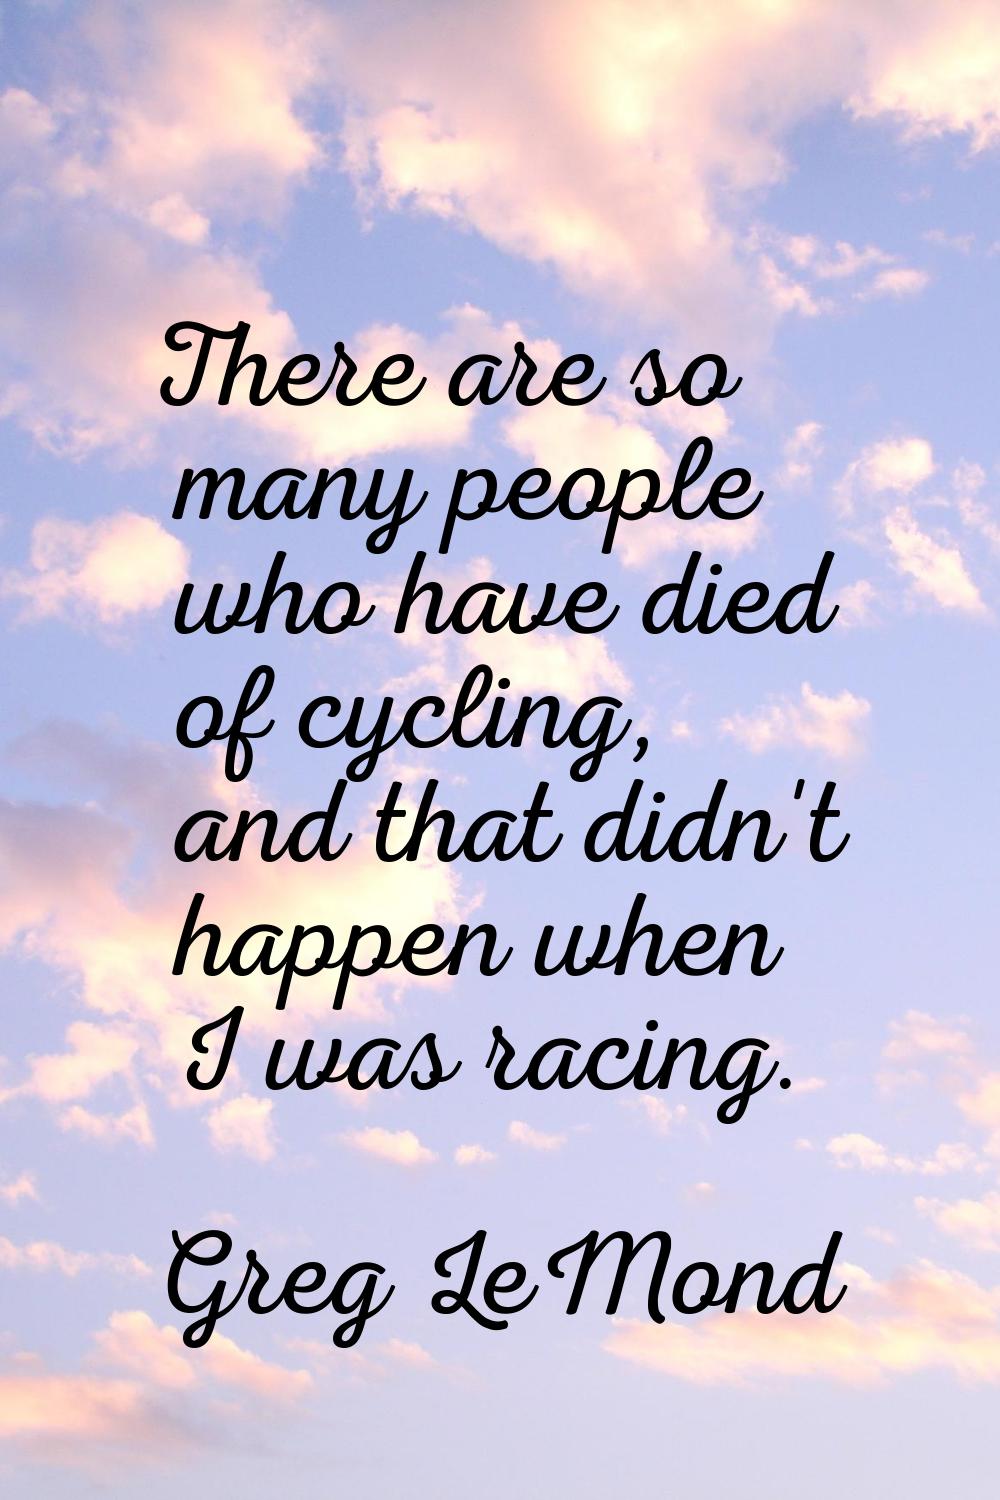 There are so many people who have died of cycling, and that didn't happen when I was racing.